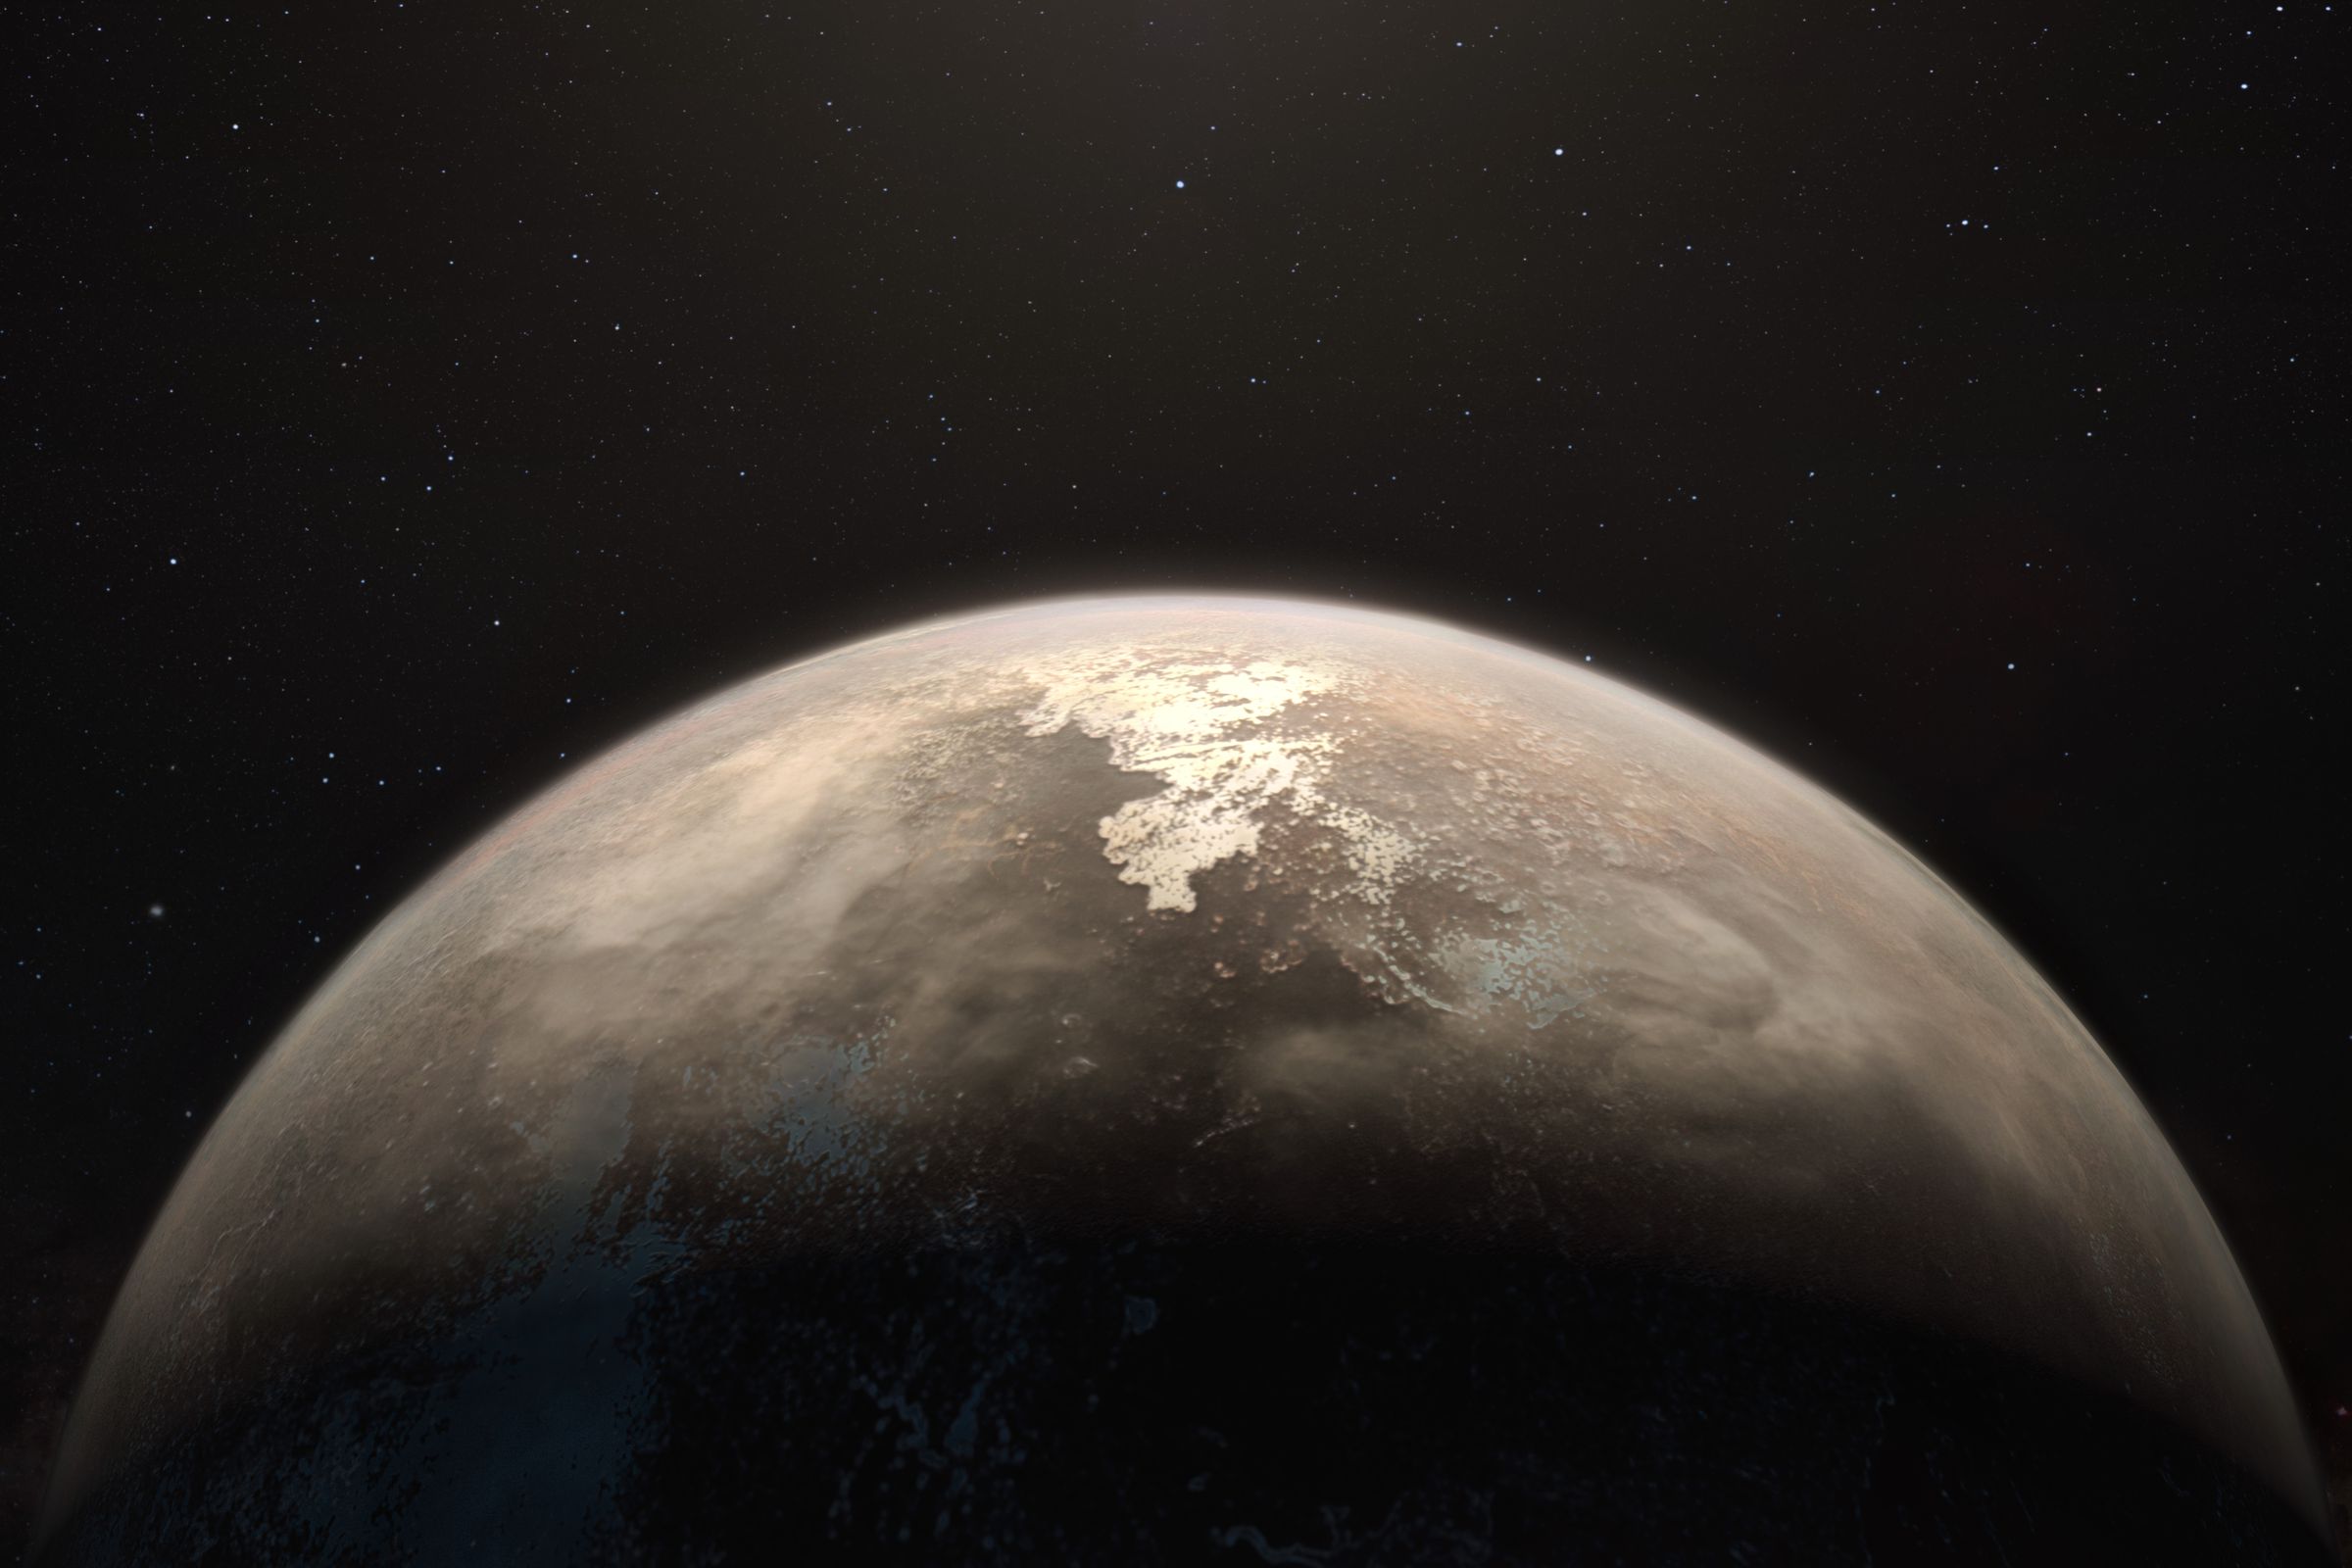 An artist’s impression of the planet Ross 128 b.